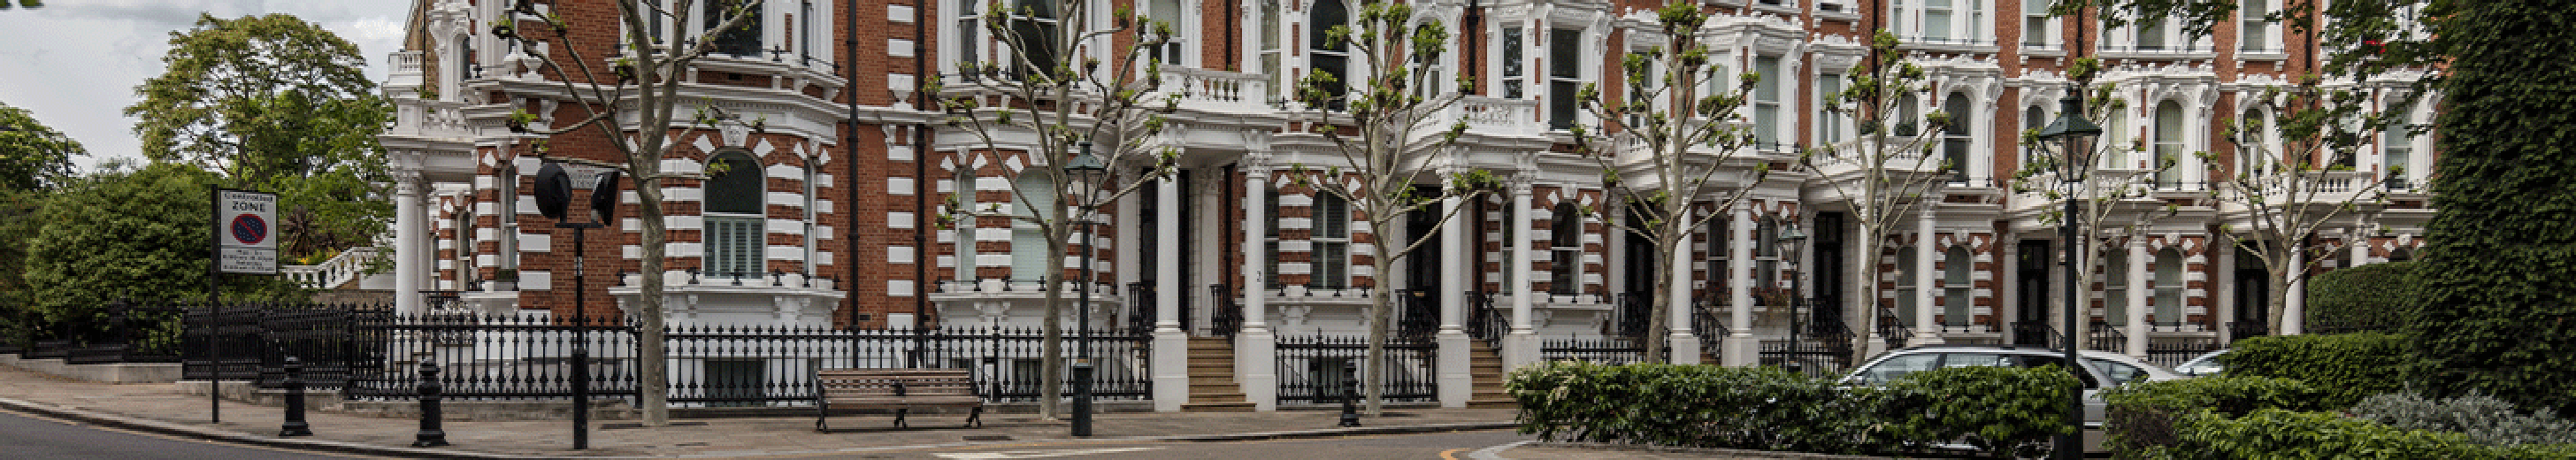 Row of houses in South Kensington